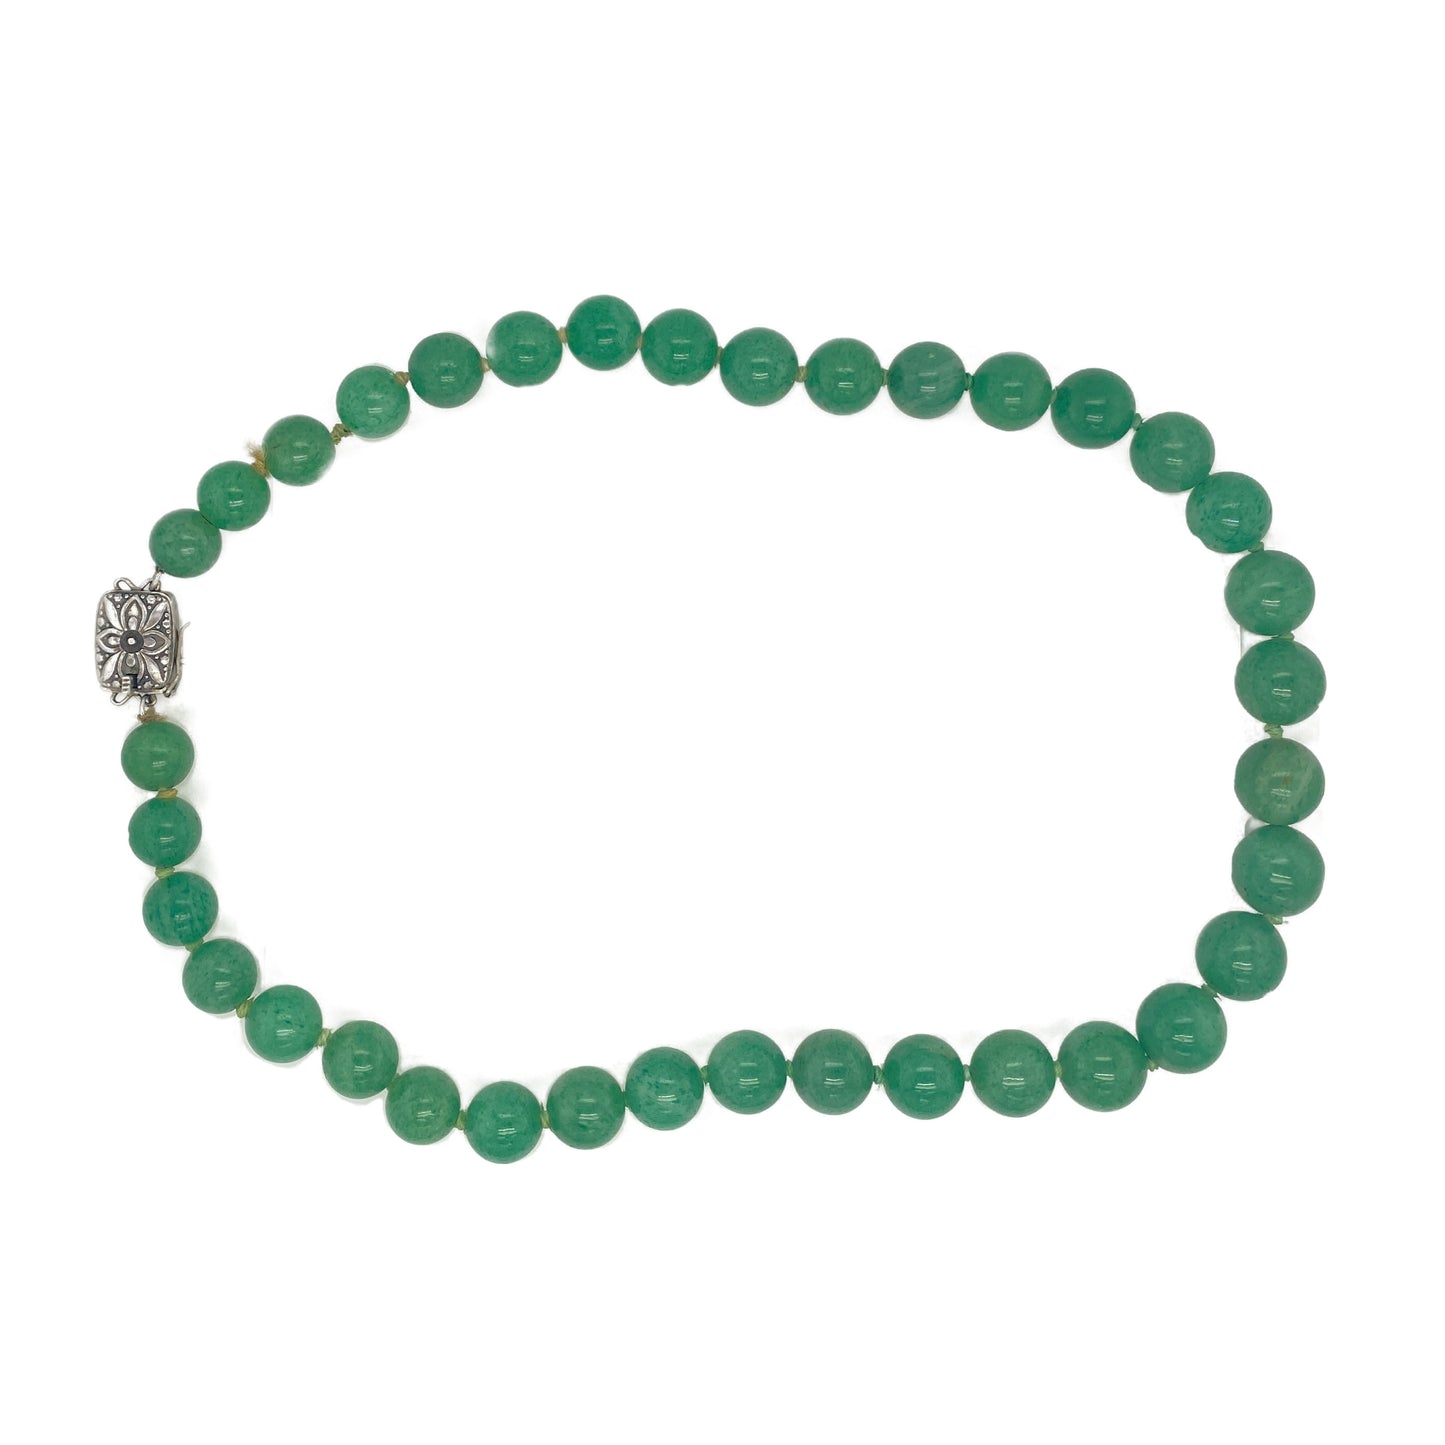 Mikimoto 1950s Green Chalcedony Bead Necklace with Silver Clasp